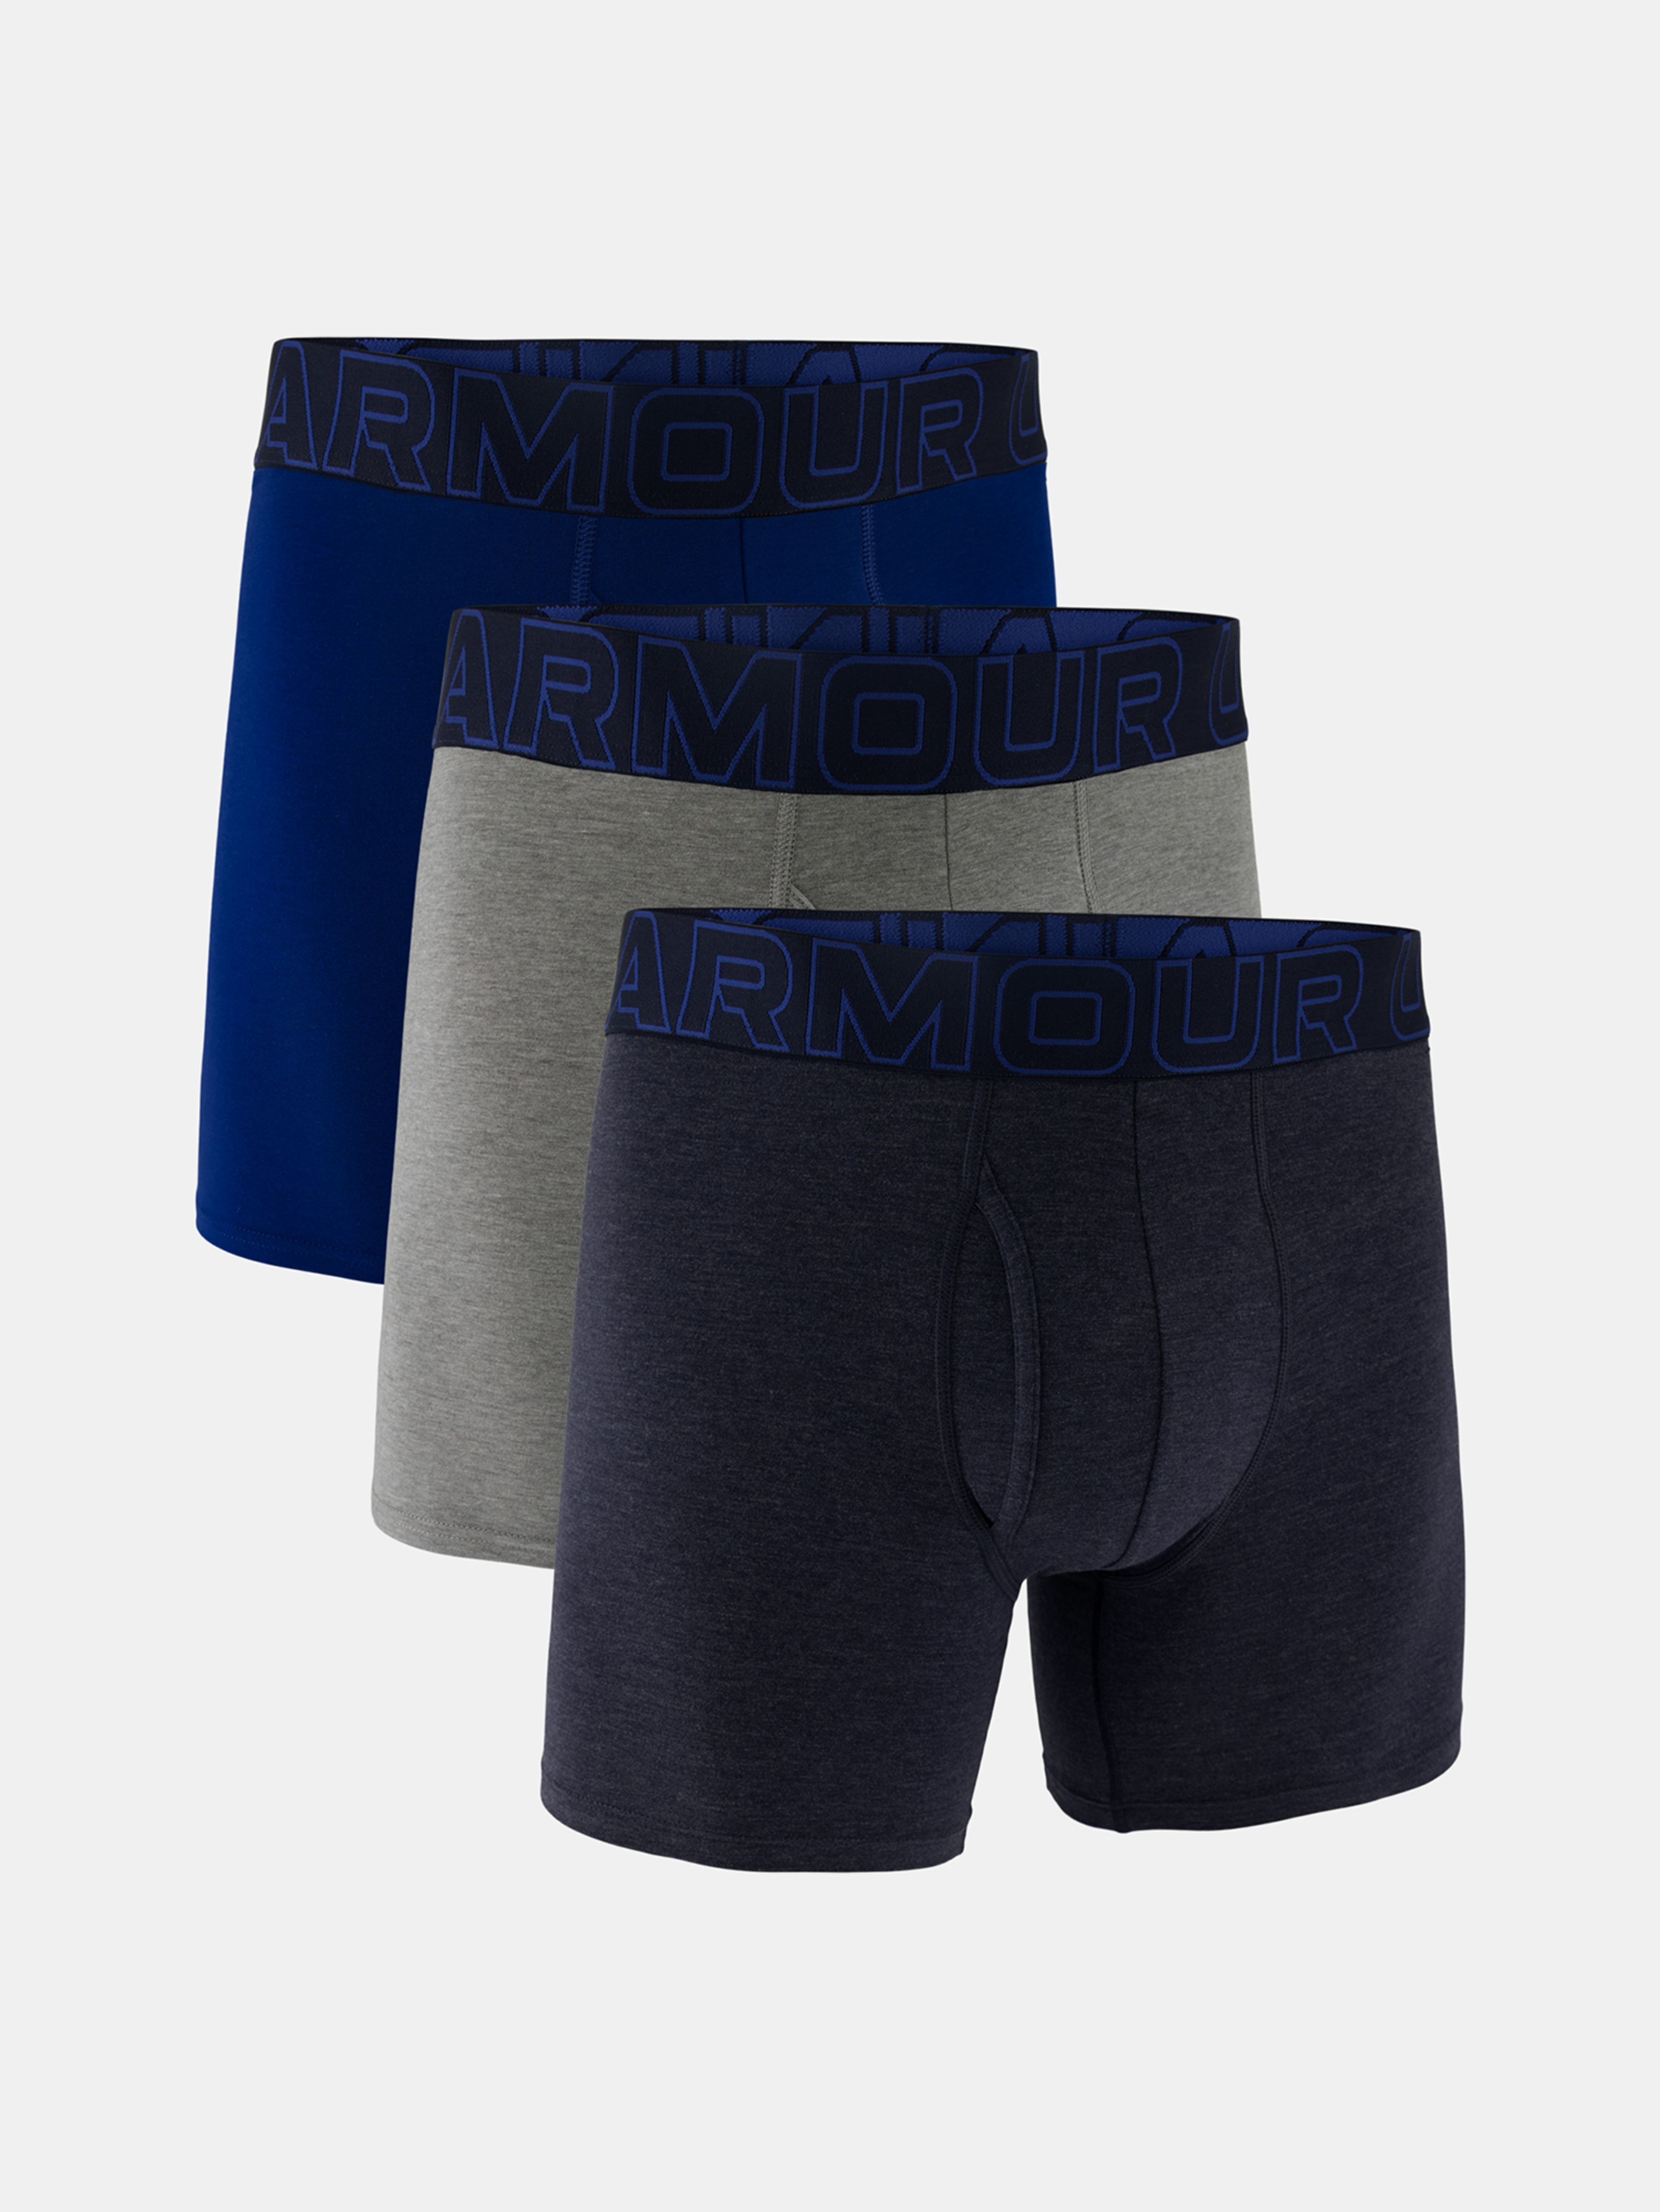 Boxerky Under Armour M UA Perf Cotton 6in-BLU